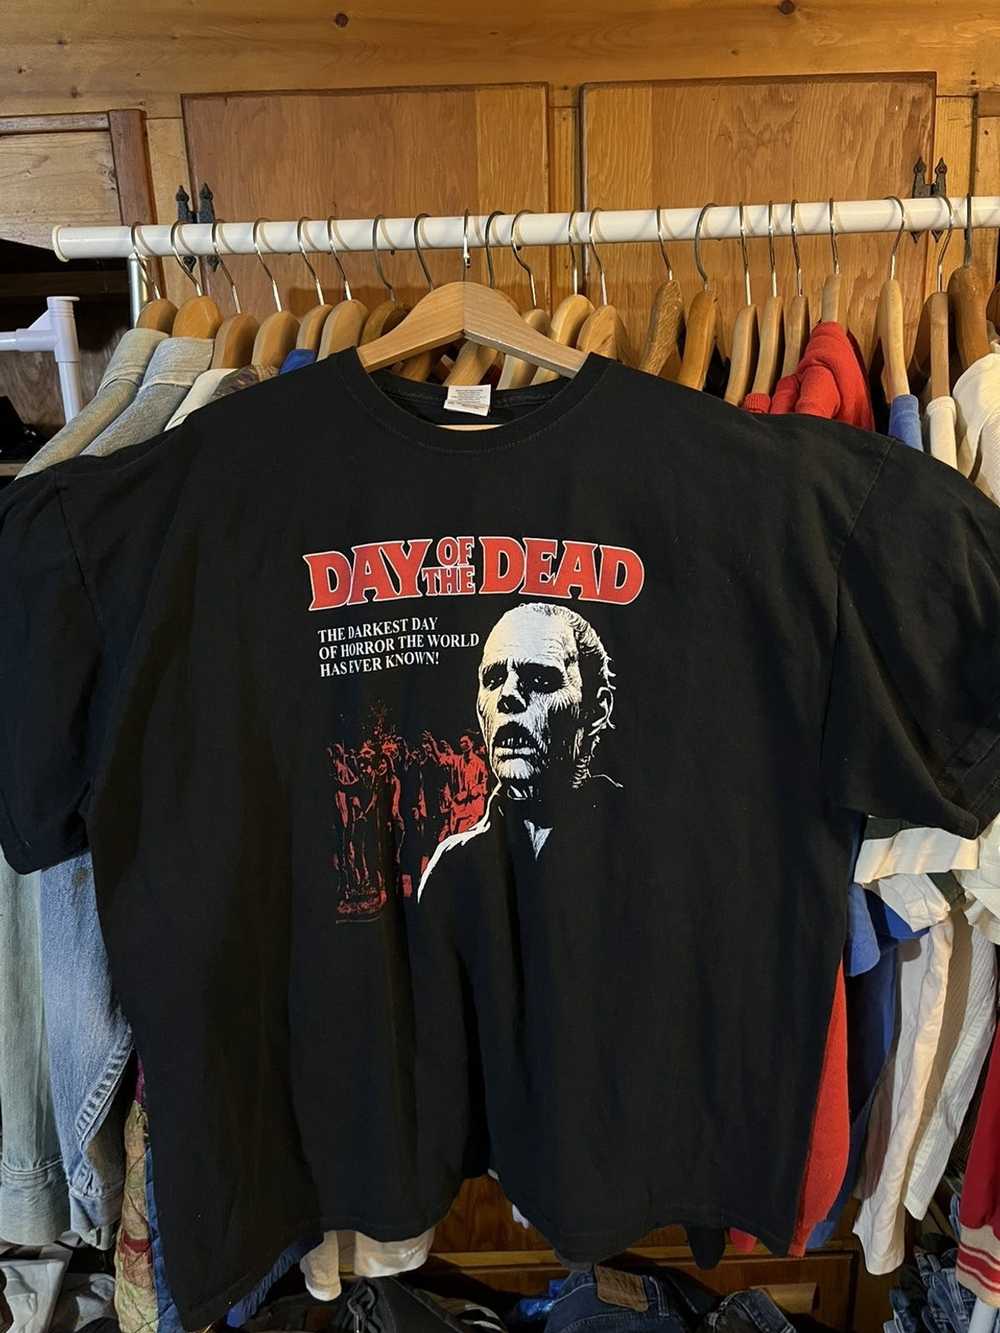 Movie × Vintage Vintage Day of the Dead shirt - image 2